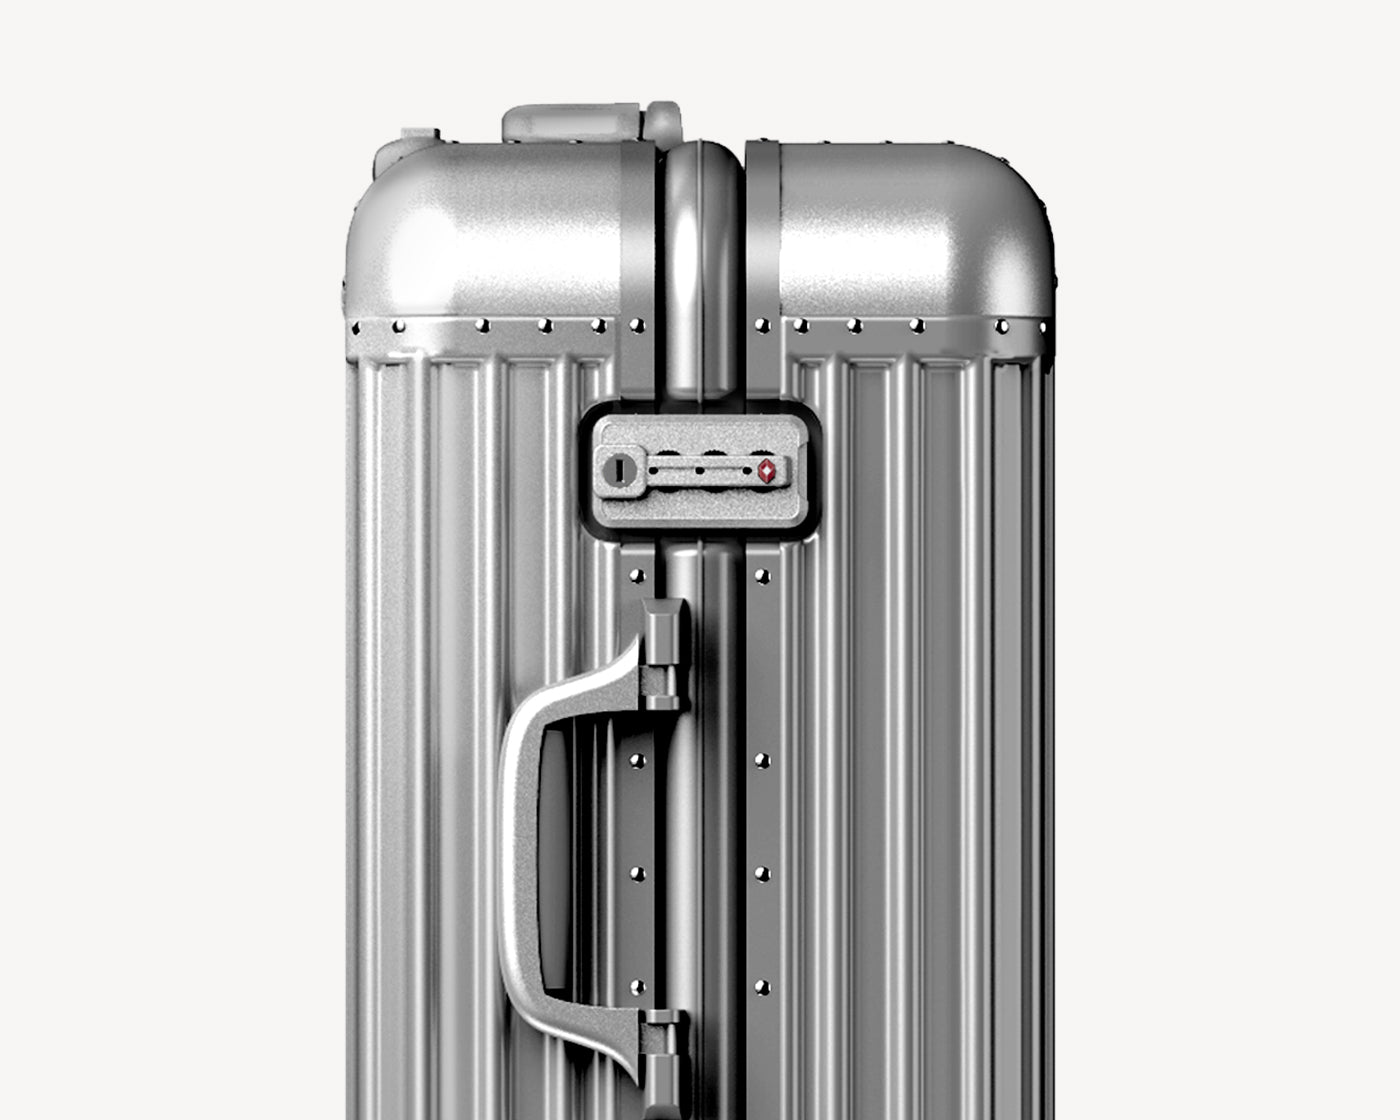 Close-up view of a silver metallic suitcase's top handle and telescoping handle mechanism with secure locks and riveted construction.